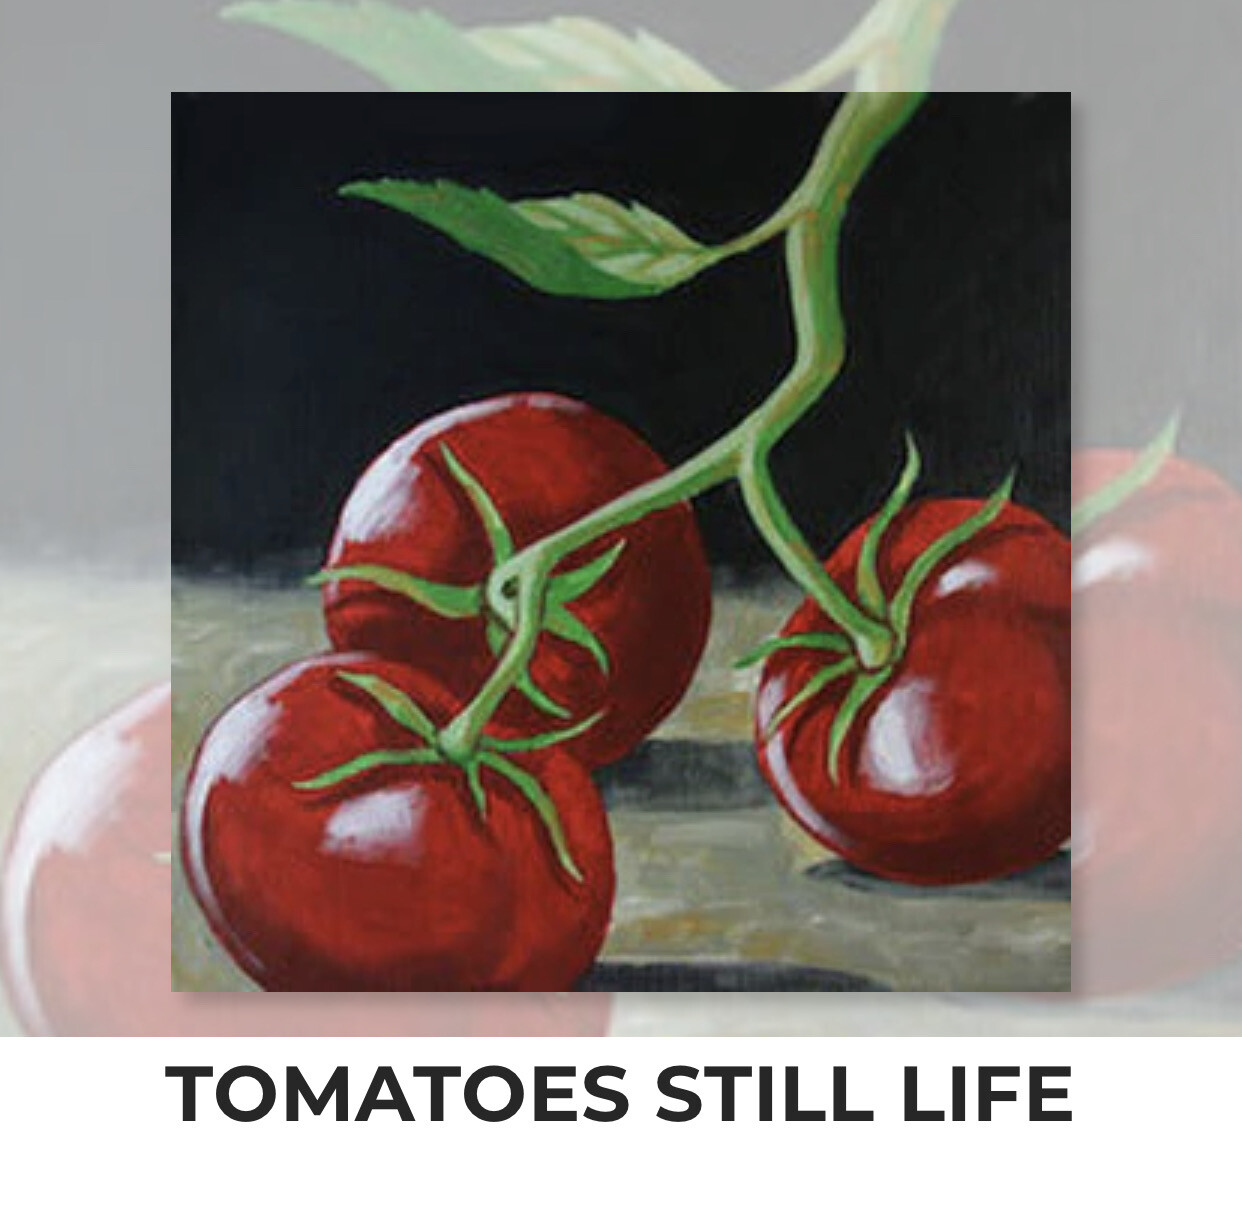 Tomatoes Still Life ADULT OR TWEEN Acrylic Paint On Canvas DIY Art Kit - 3 Week Special Order